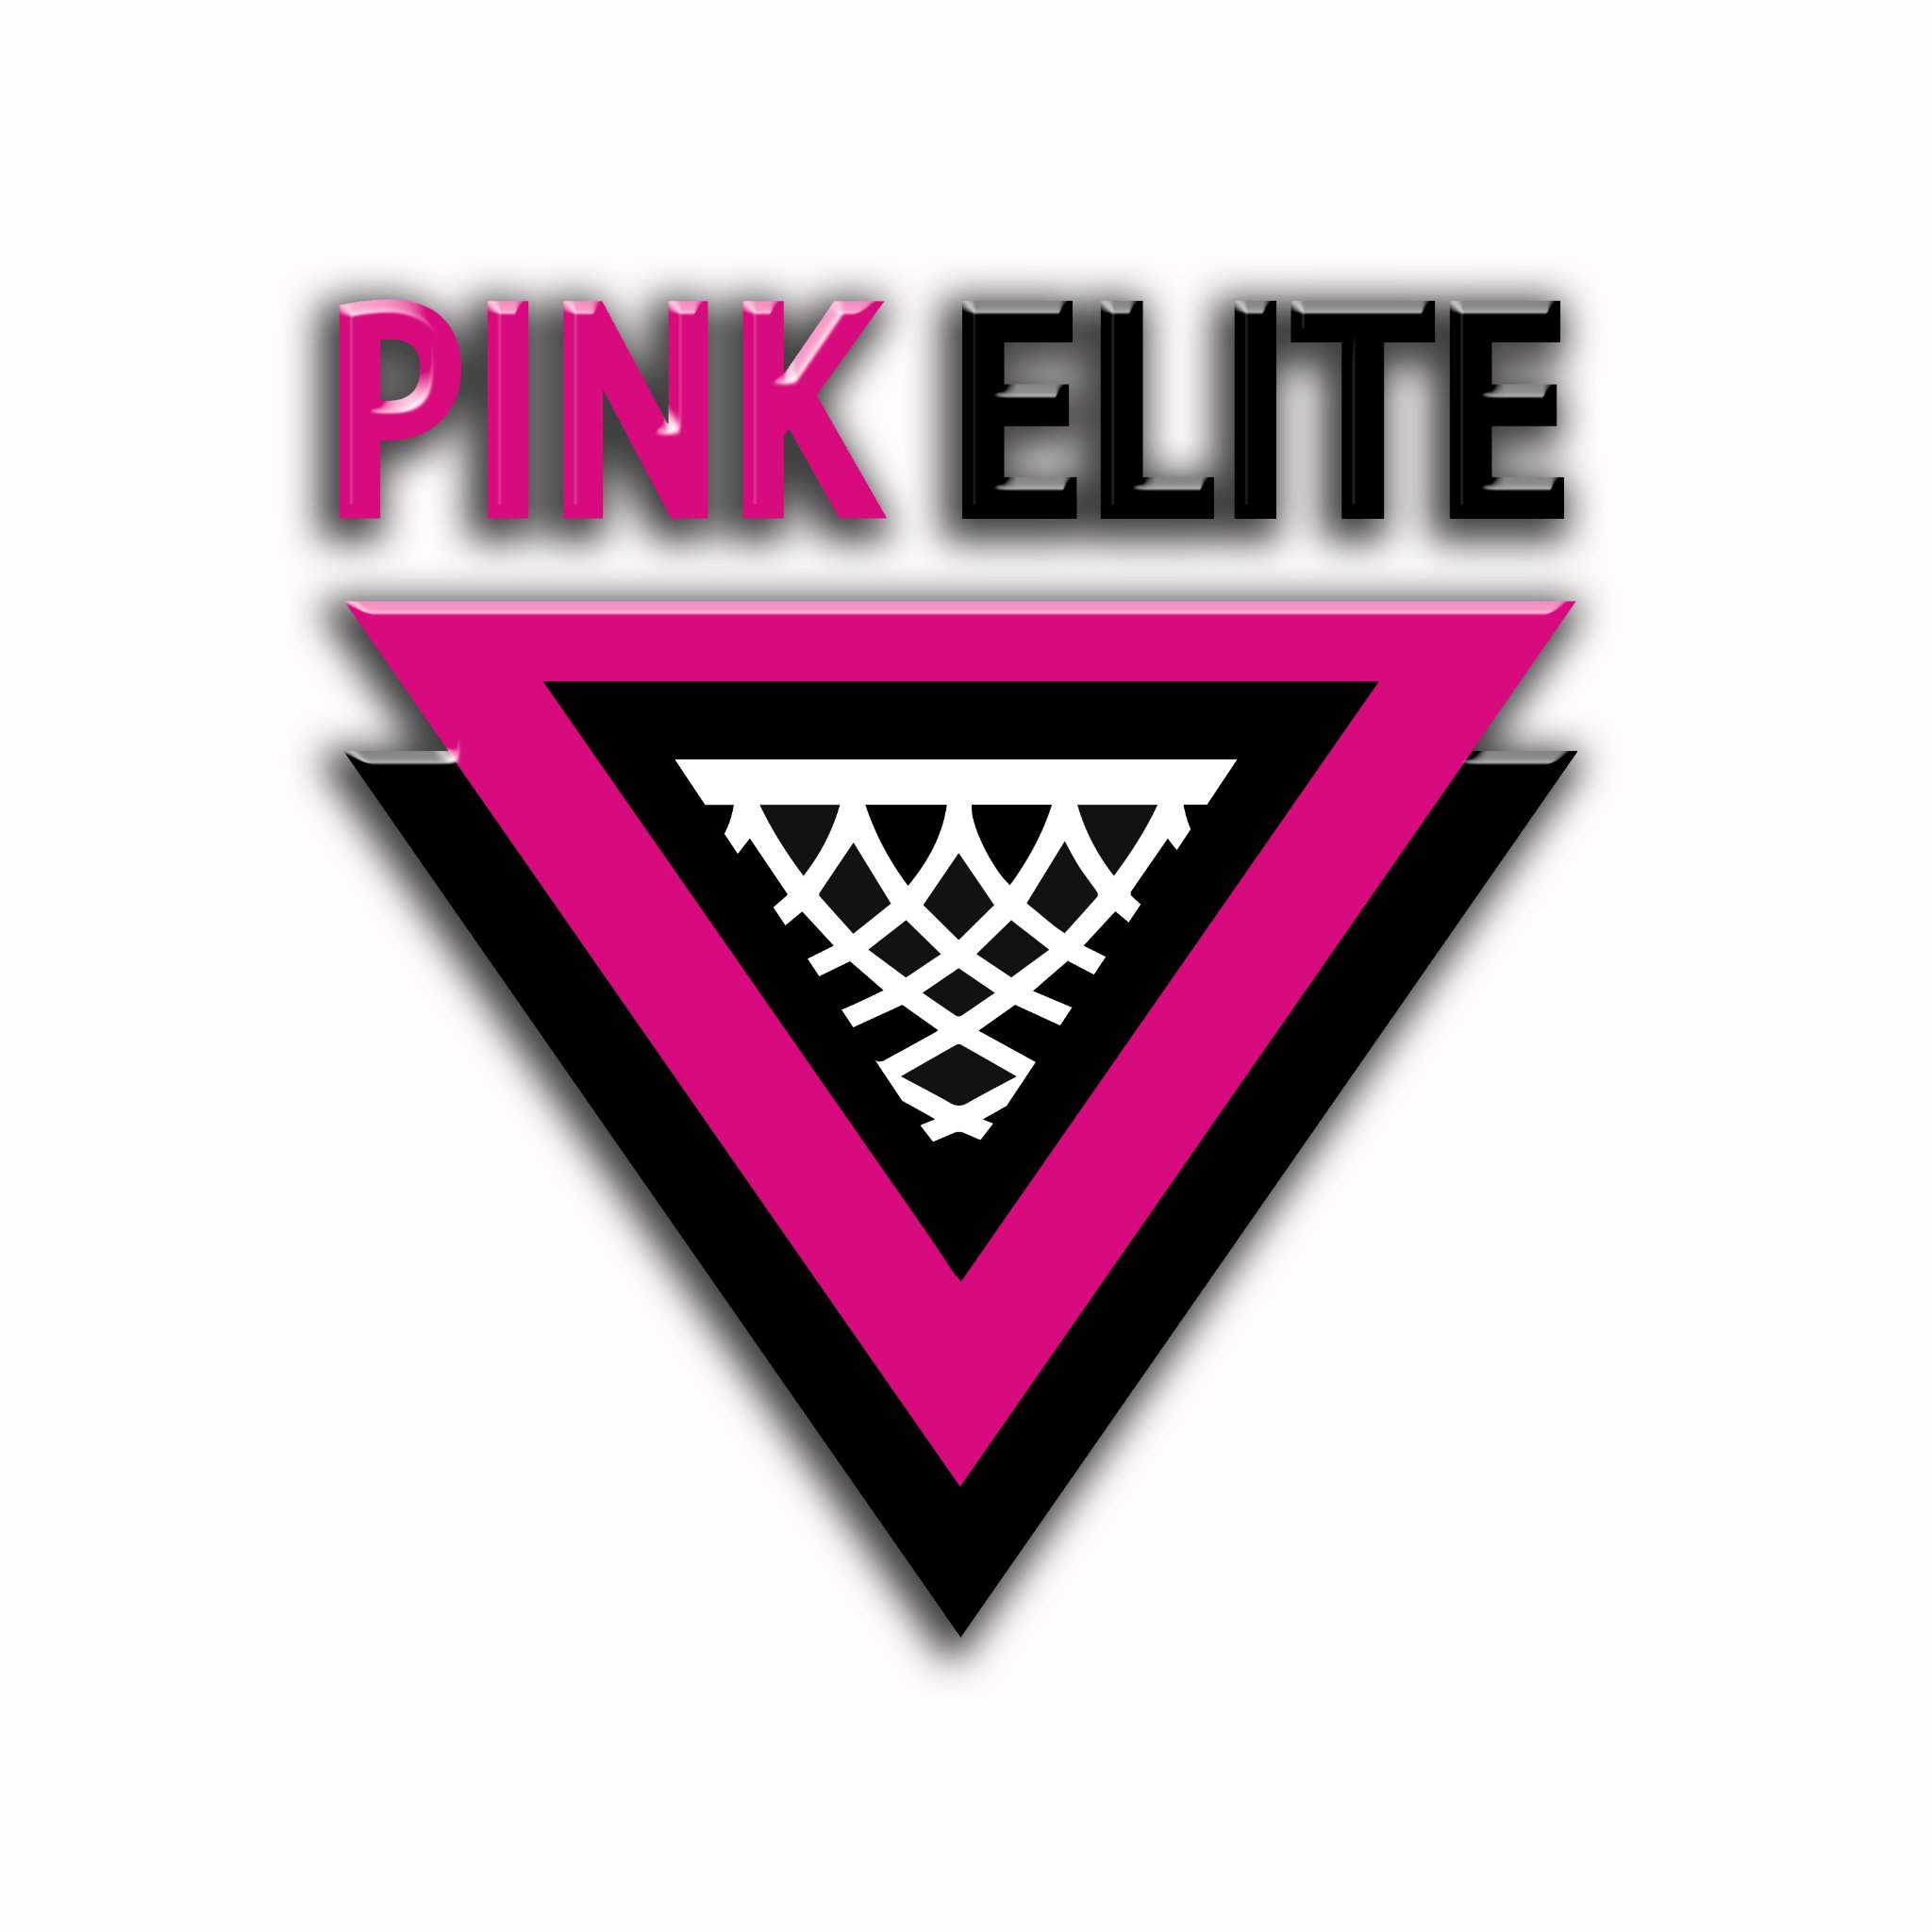 All-inclusive Nike Blue Star elite girls basketball program with skills training, club teams and camps- Kinder- Elite HS in the Chicagoland area.